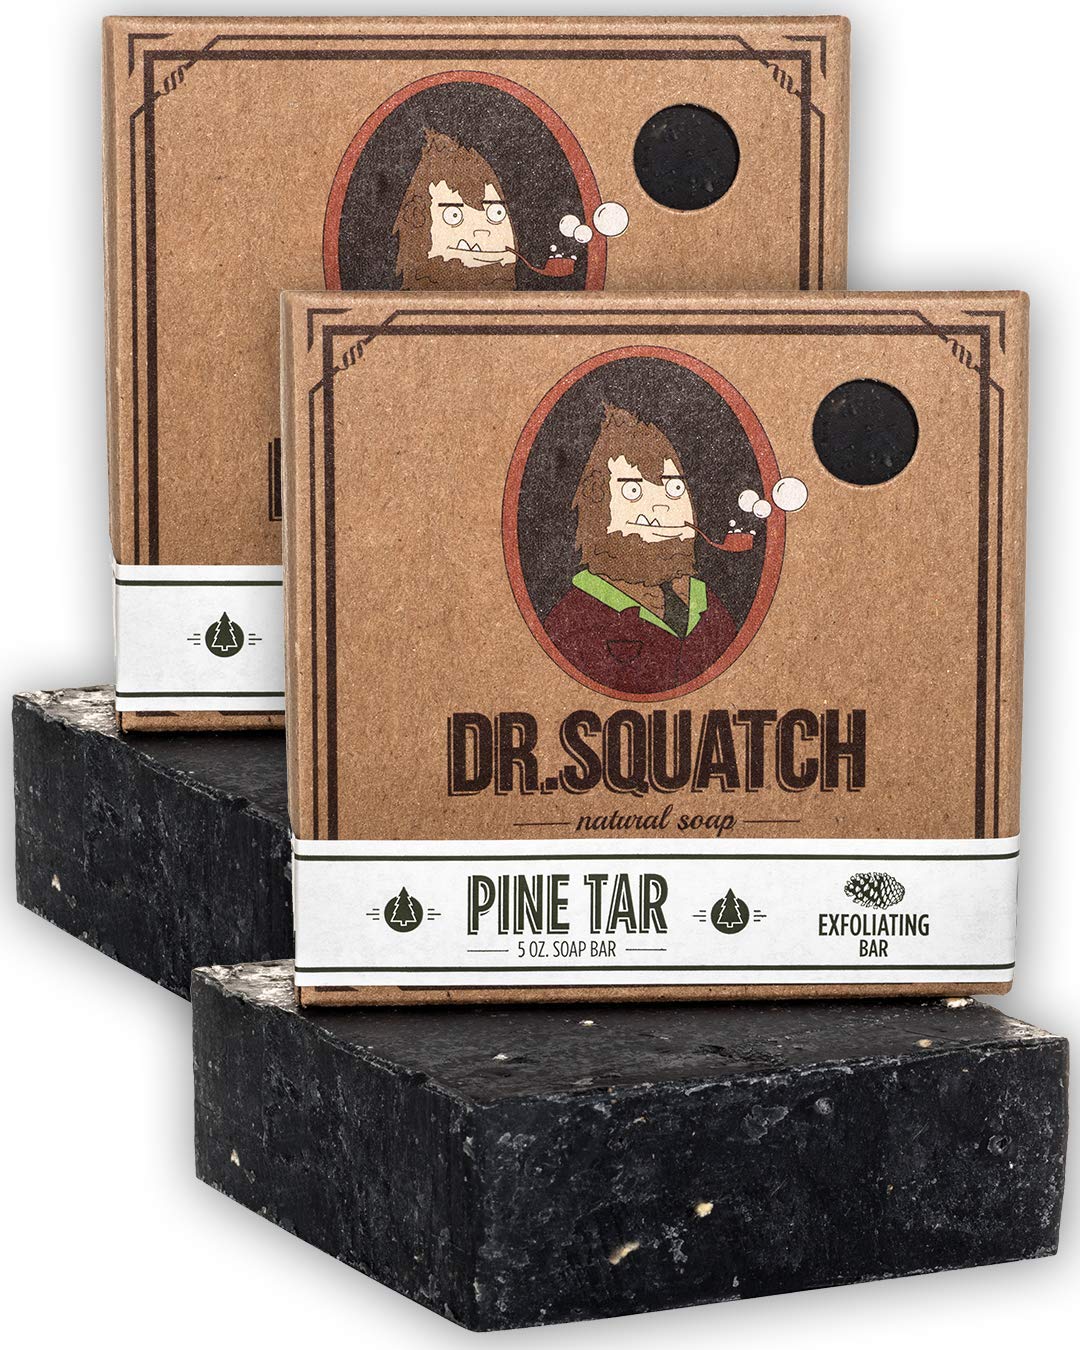 Dr. Squatch Pine Tar Soap 2-Pack Bundle - Mens Bar with Natural Woodsy Scent and Skin Exfoliating Scrub – Handmade with Pine, Coconut, Olive Organic Oils in USA (2 Bar Set)